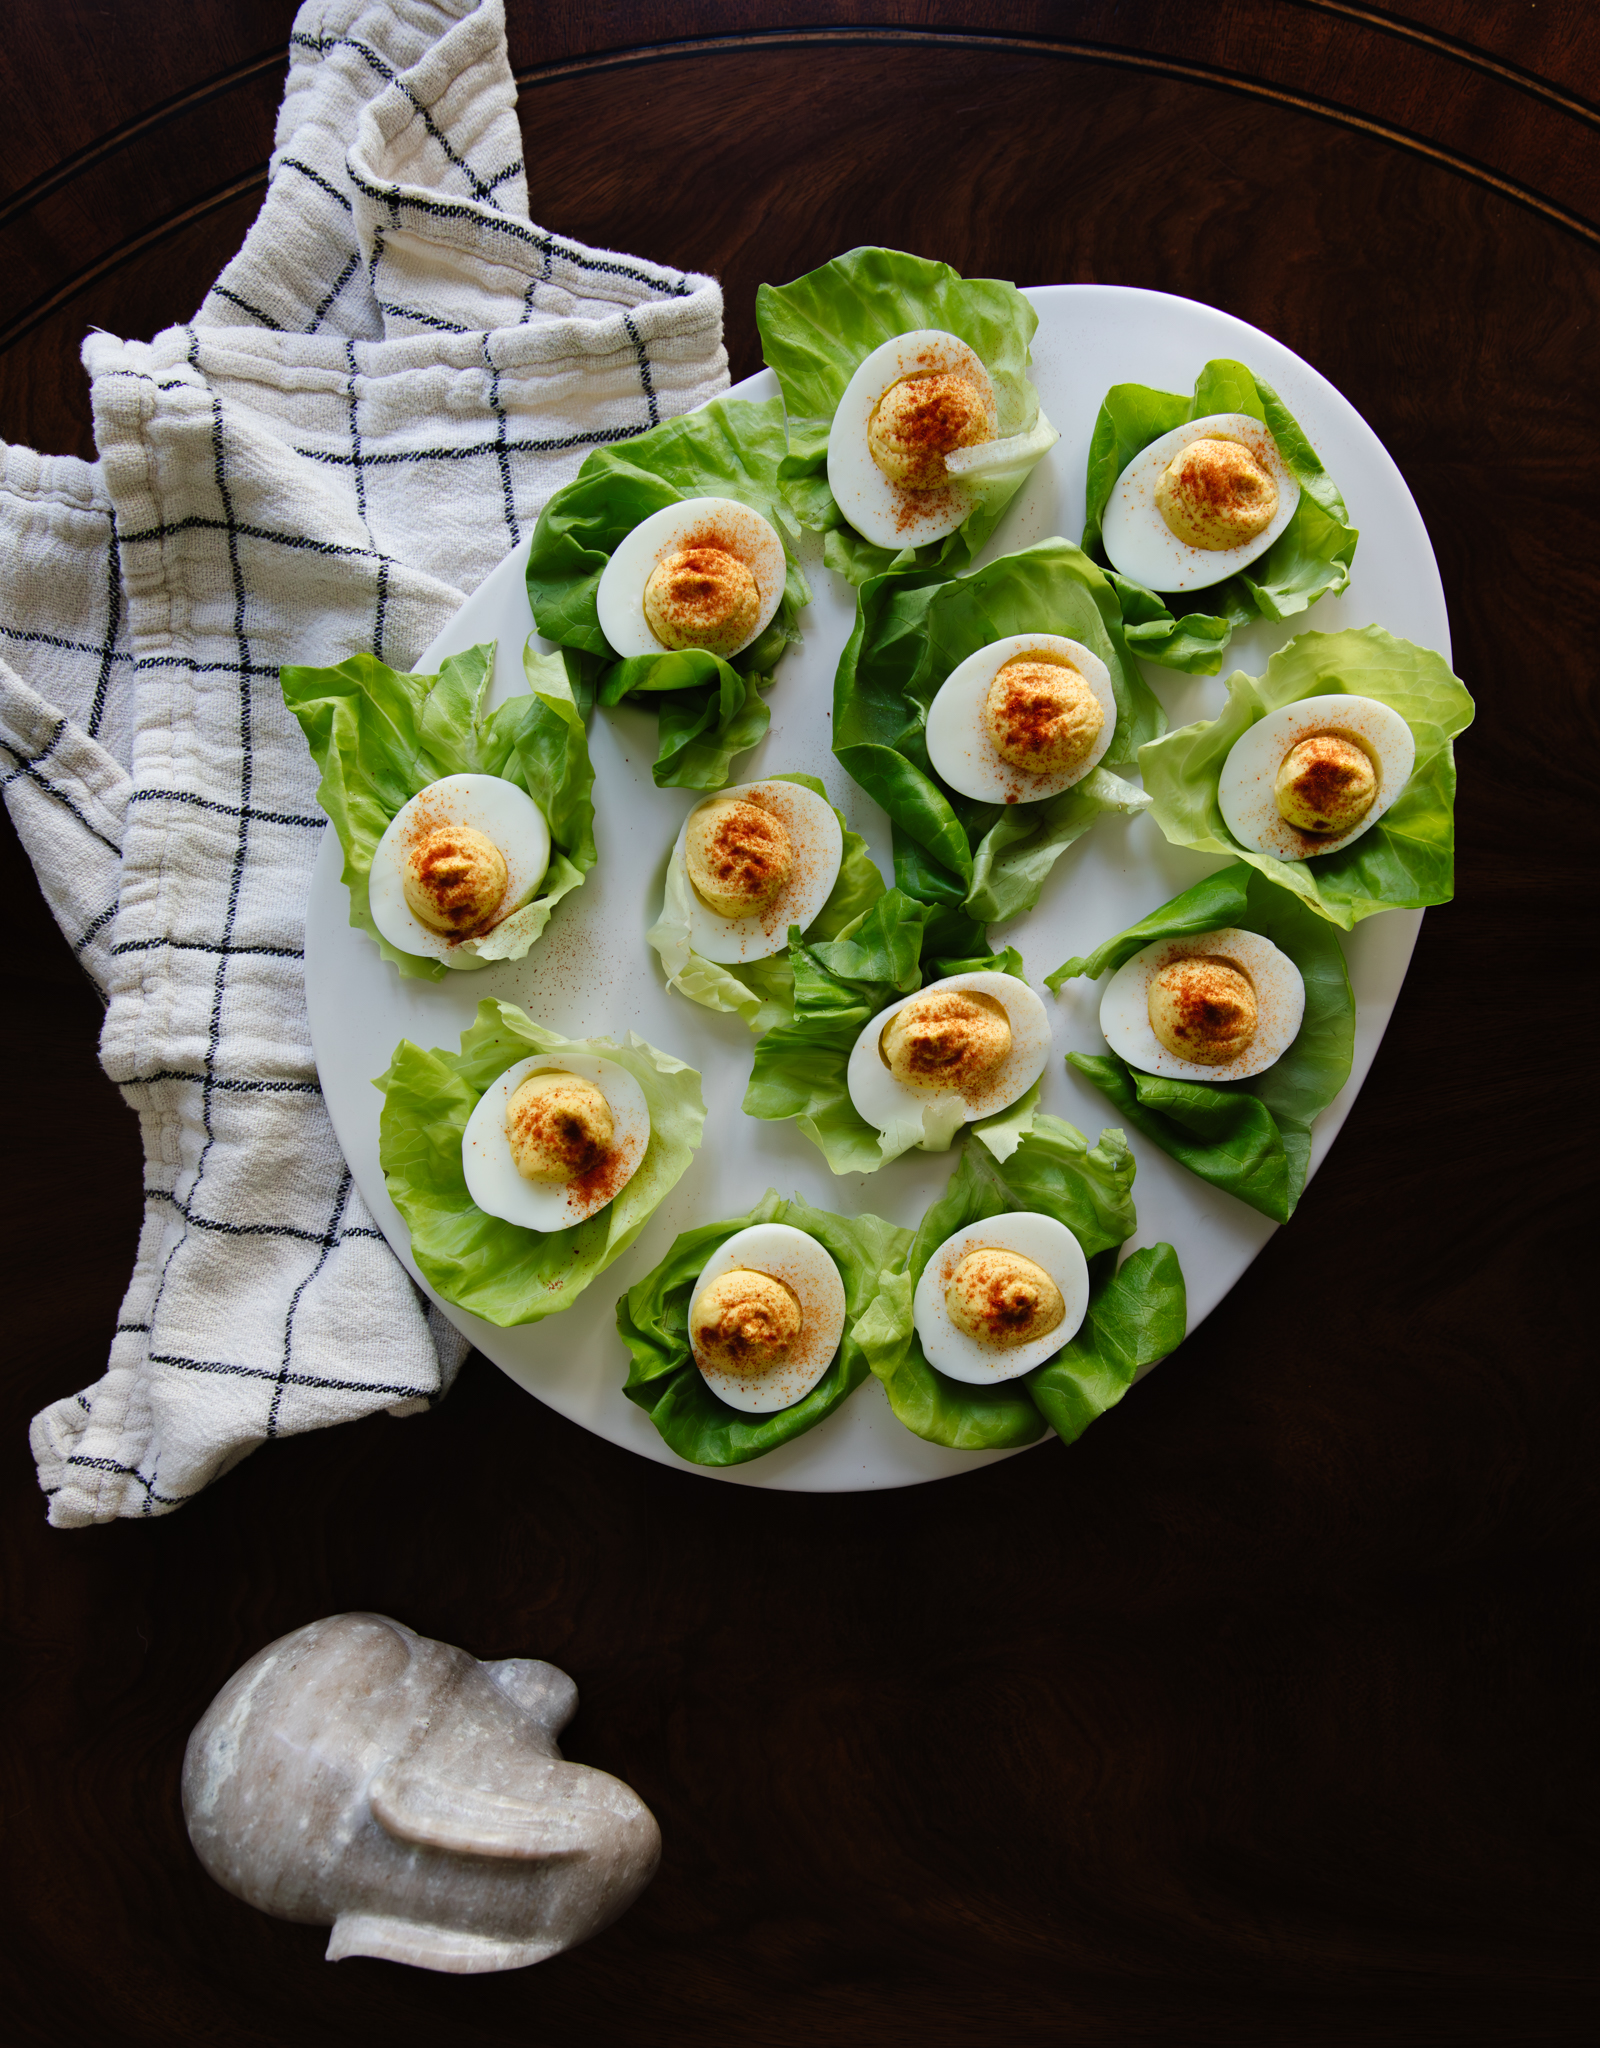 The Best Deviled Egg Recipe - A Classic